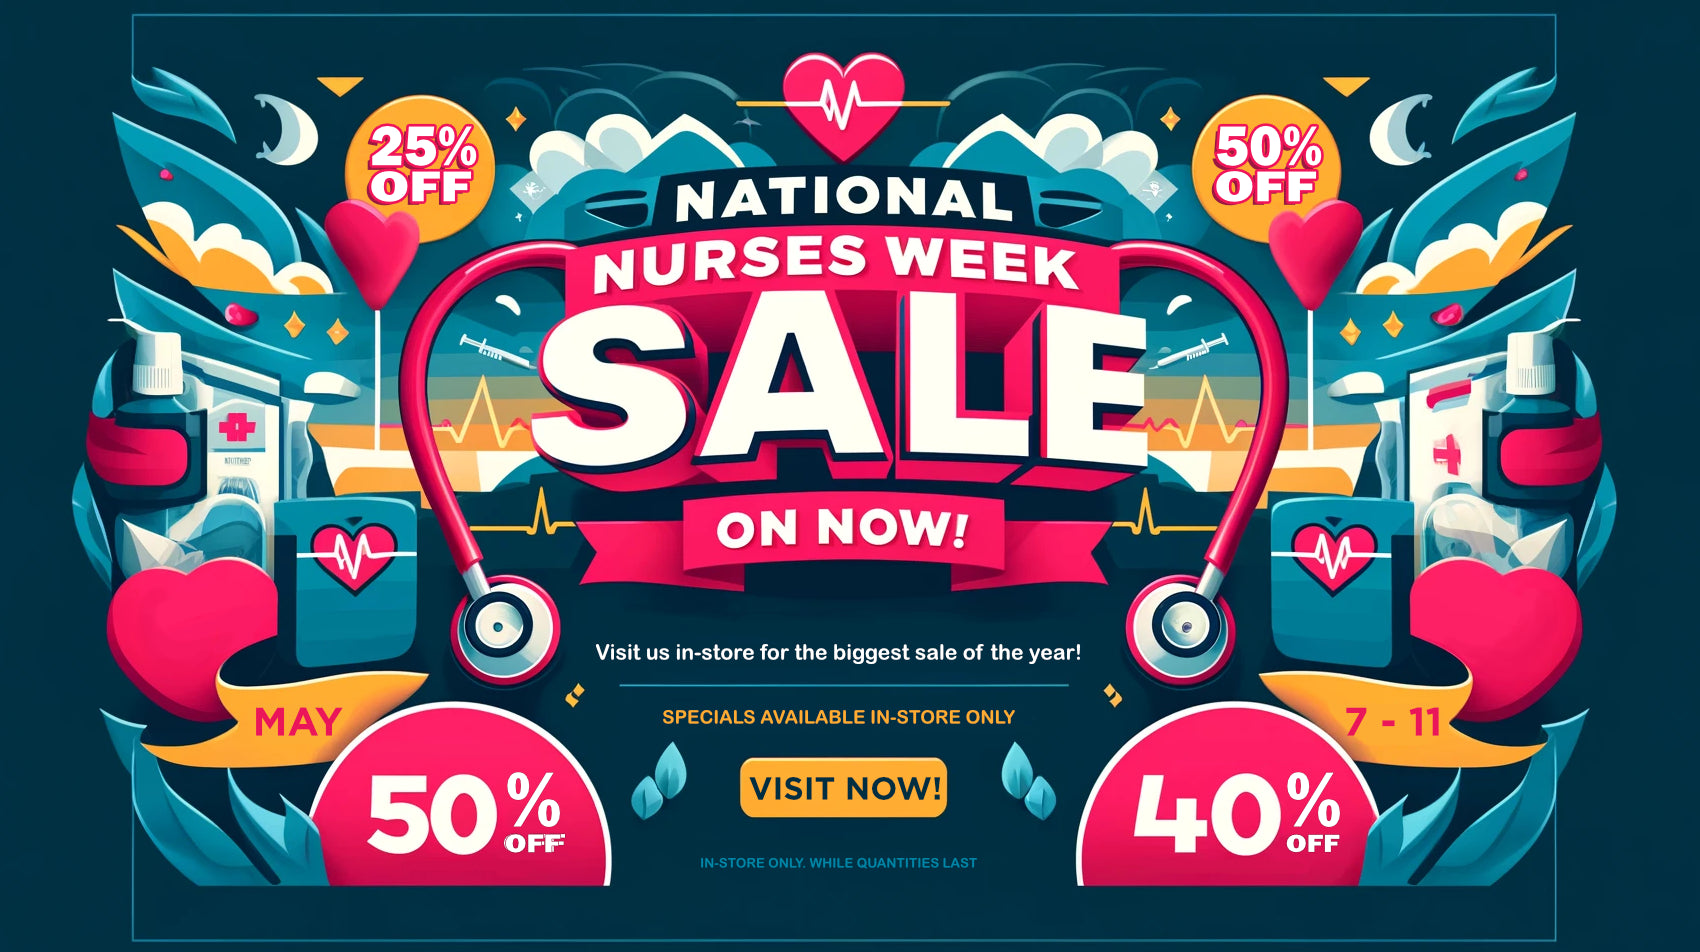 National Nurses Week Sale On Now. Visit us for the biggest sale of the year!